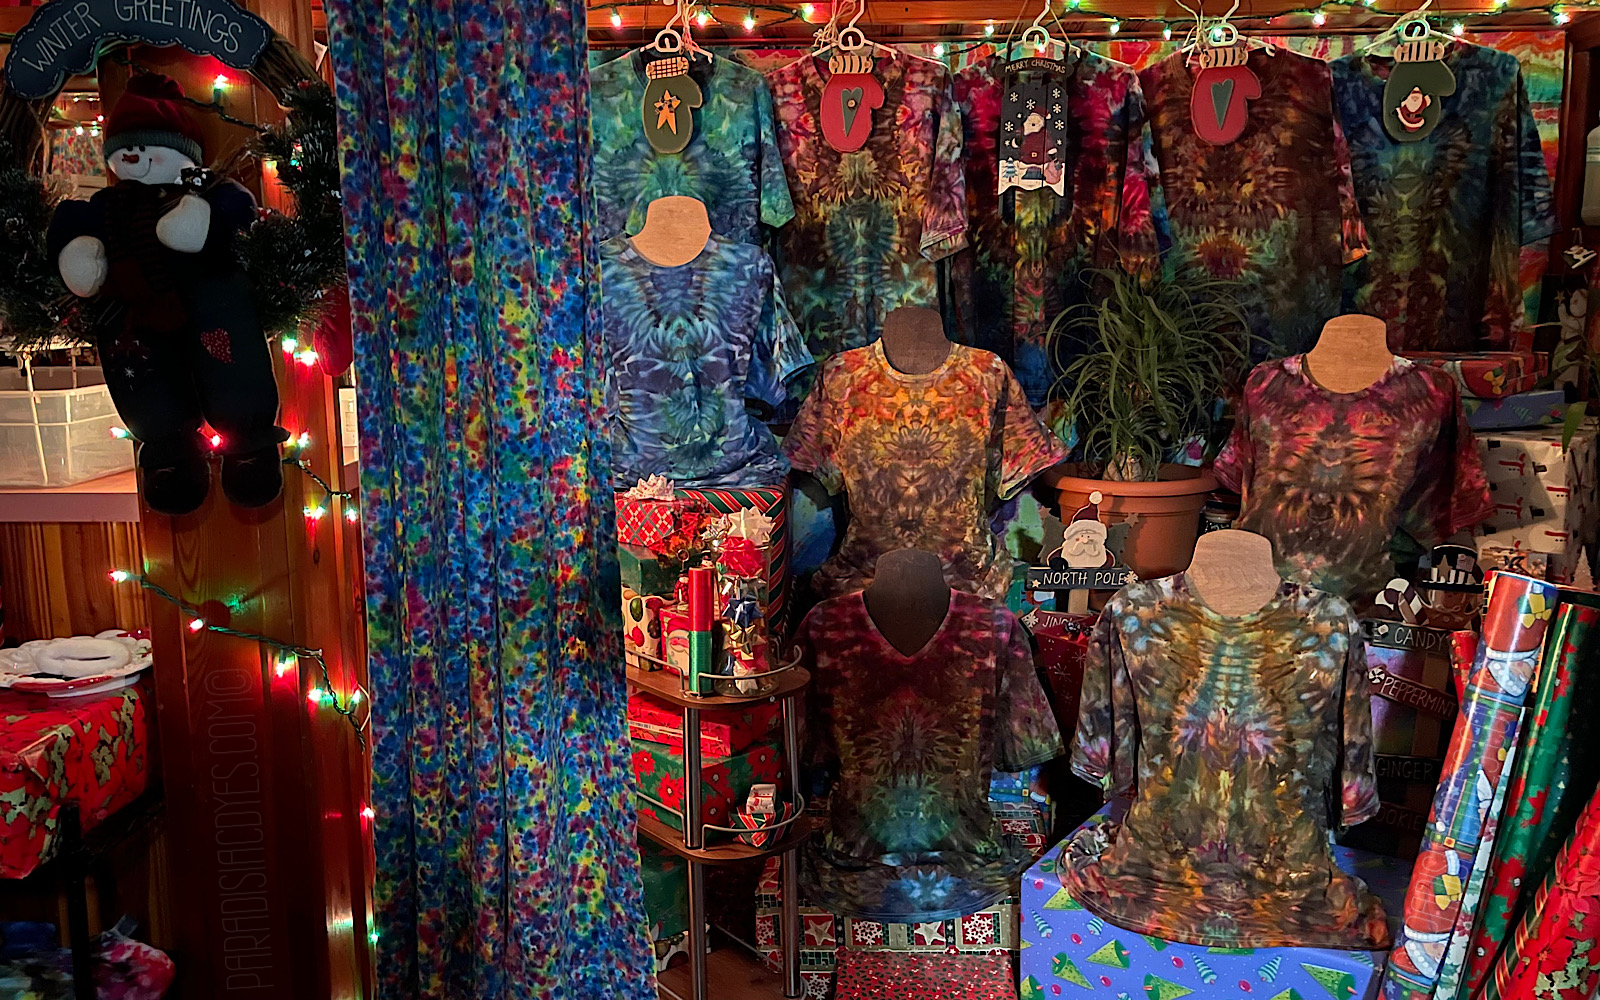 Just to the right of the tie dye bar, are five t-shirt mannequins each wearing a new, symmetrical psychedelic mindscape ice dye design. The entire frame is full of Christmas decorations, gift wrapped boxes, and ambient red and green lights strung about